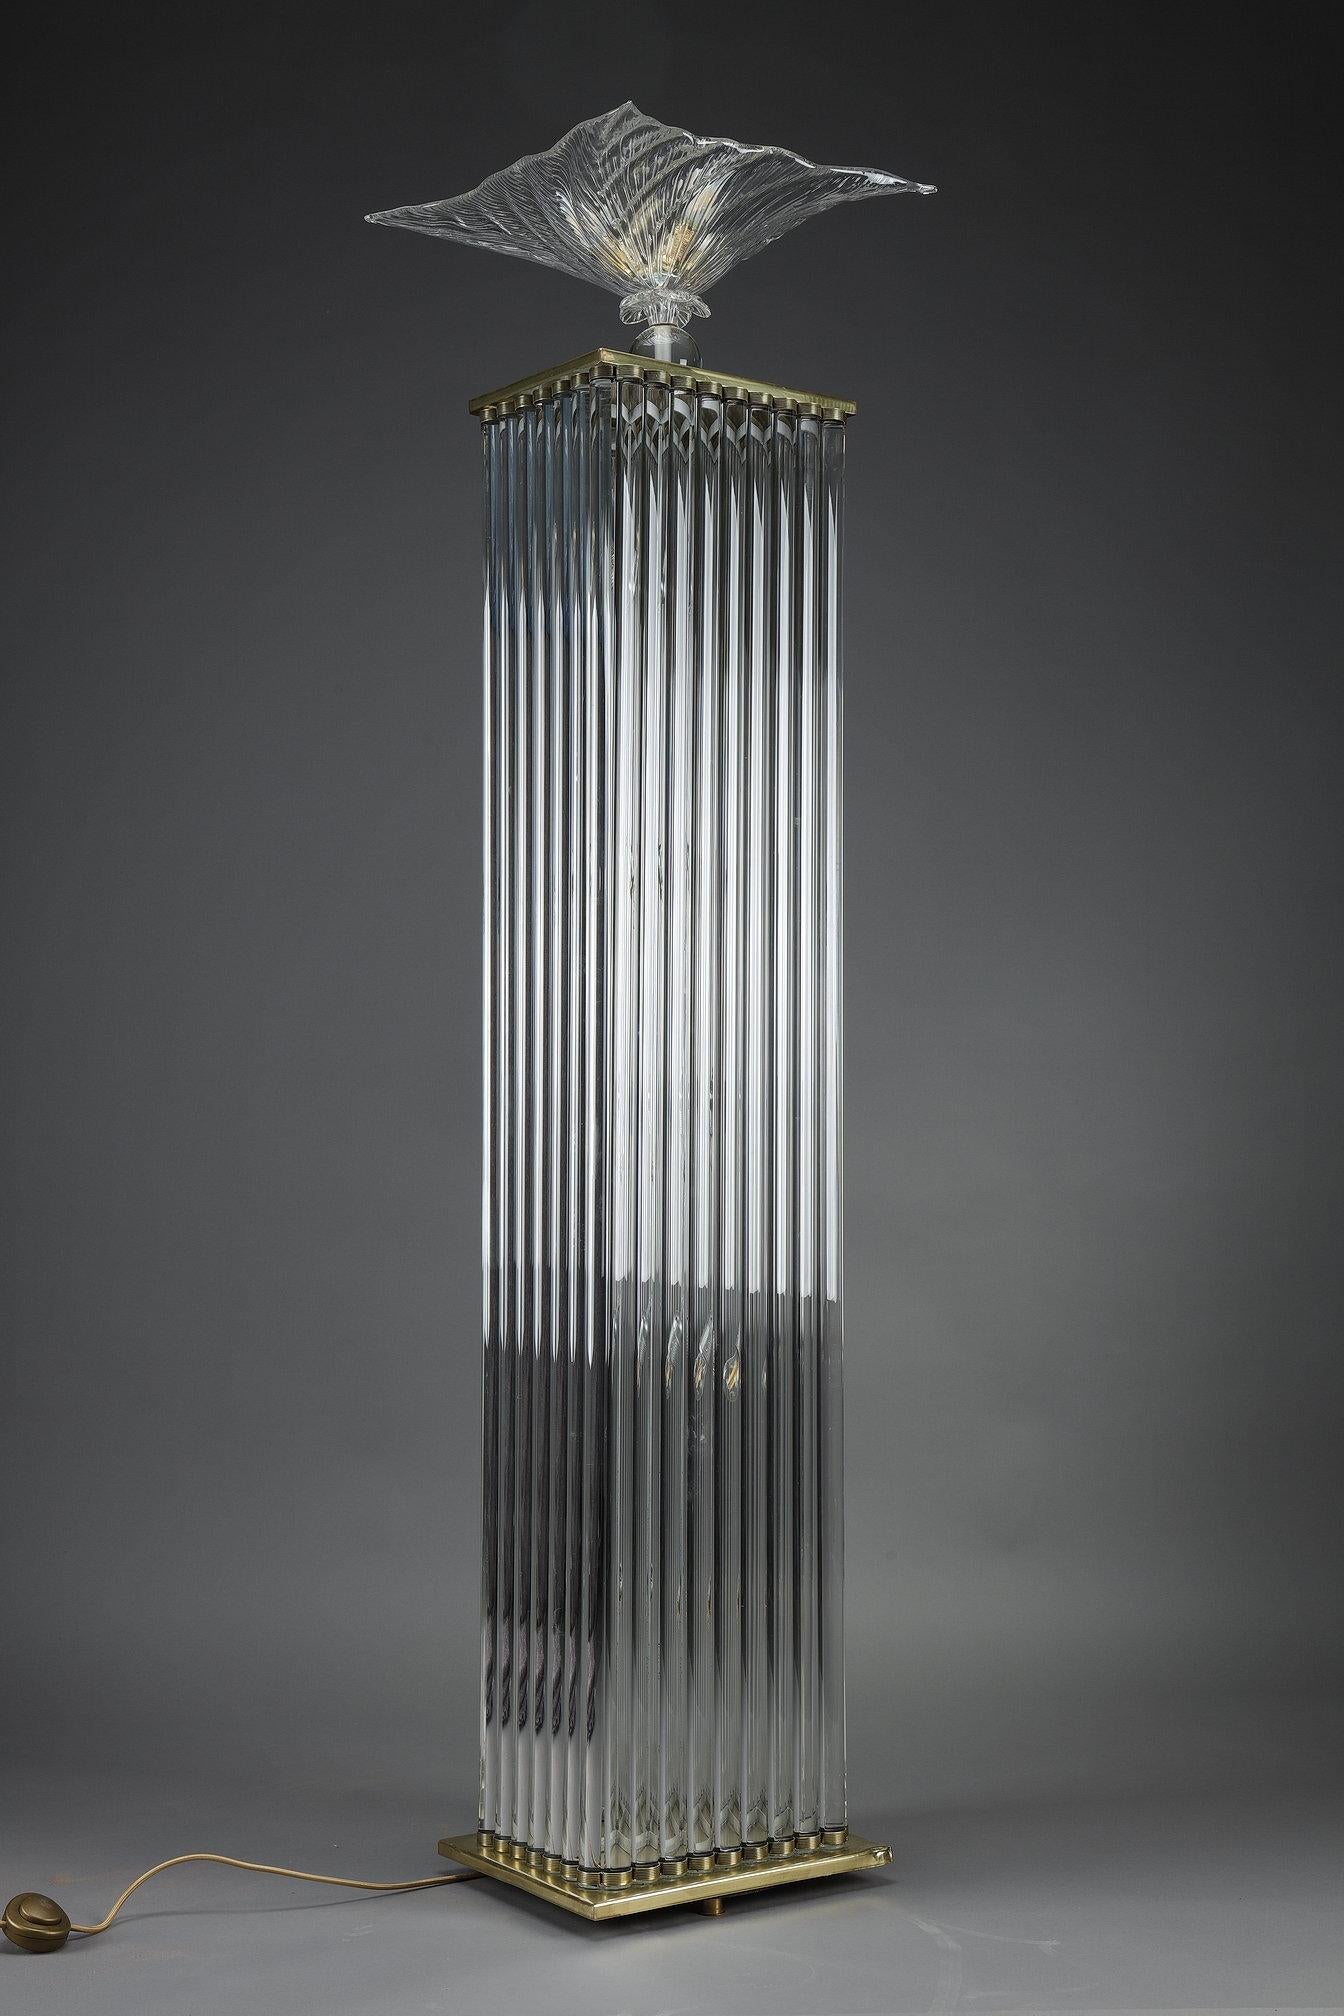 Floor lamp forming a column whose body is made up of glass tubes set on a brass base and topped by a glass shade forming a flowery basin. The fixture is electrified, with bulbs both inside the column and in the bowl. This typically Art Deco-style